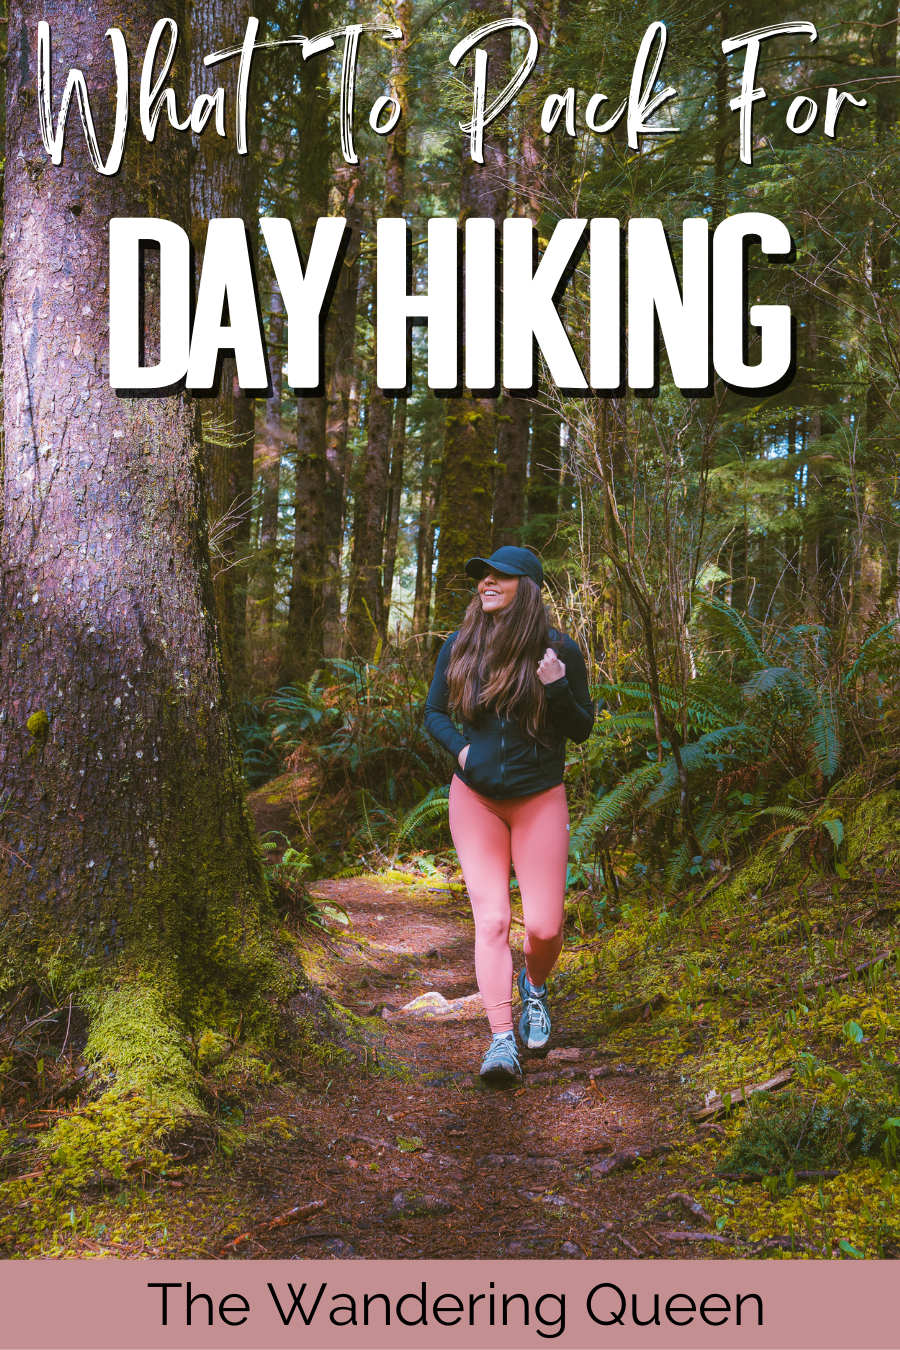 The Best Guide To The 10 Hiking Essentials: What To Pack For Hiking ...